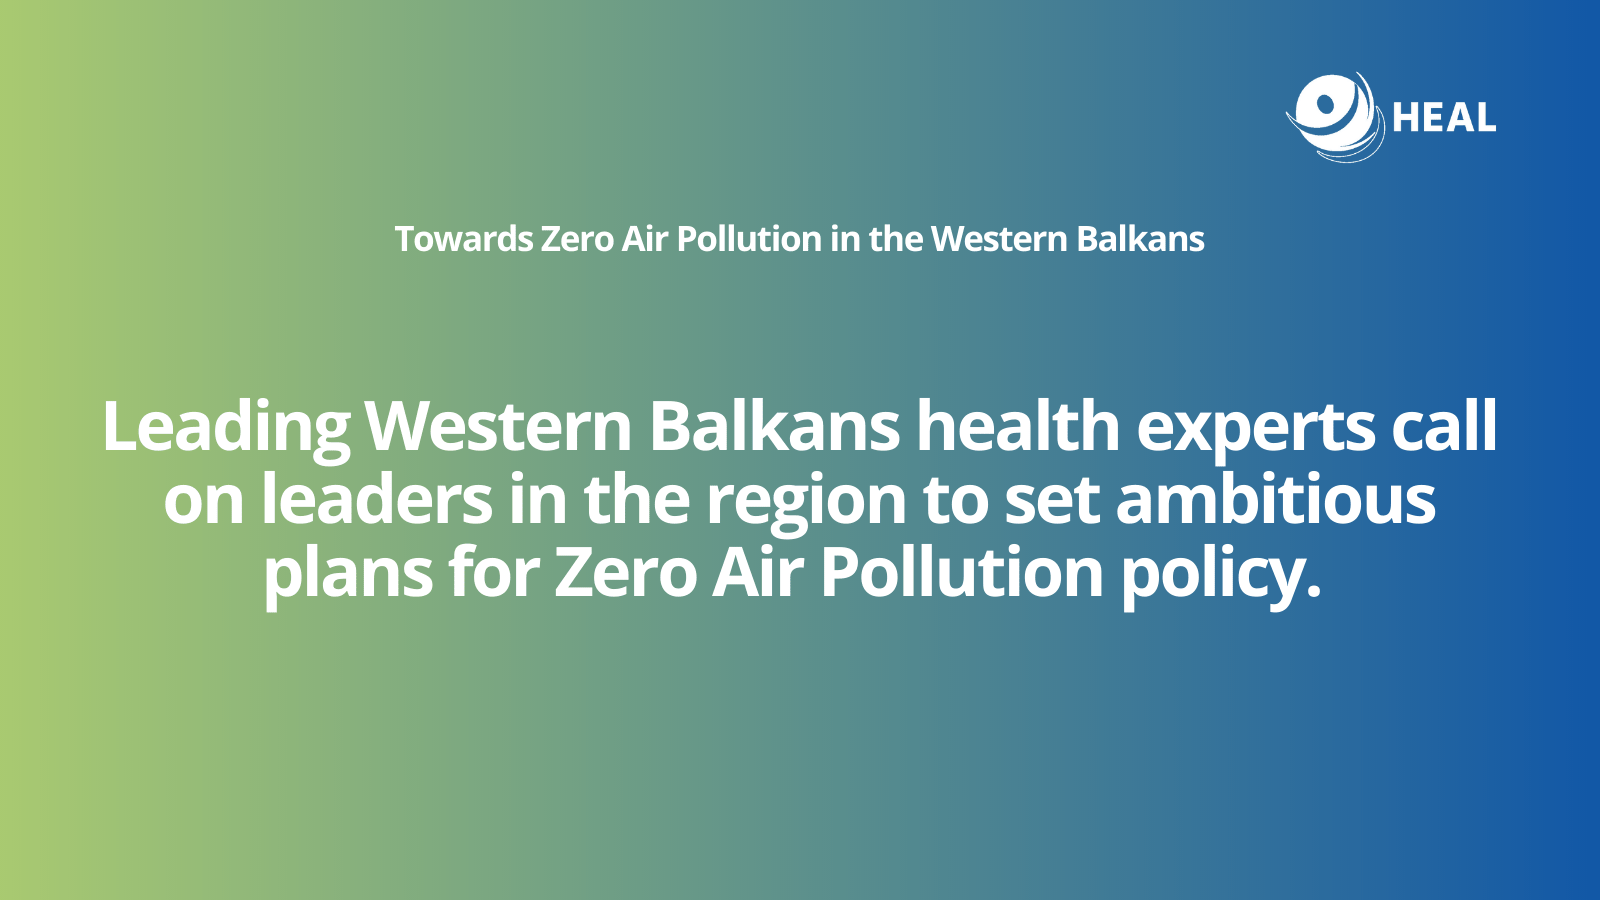 Leading Western Balkans health experts call on leaders in the region to set ambitious plans for zero air pollution policy